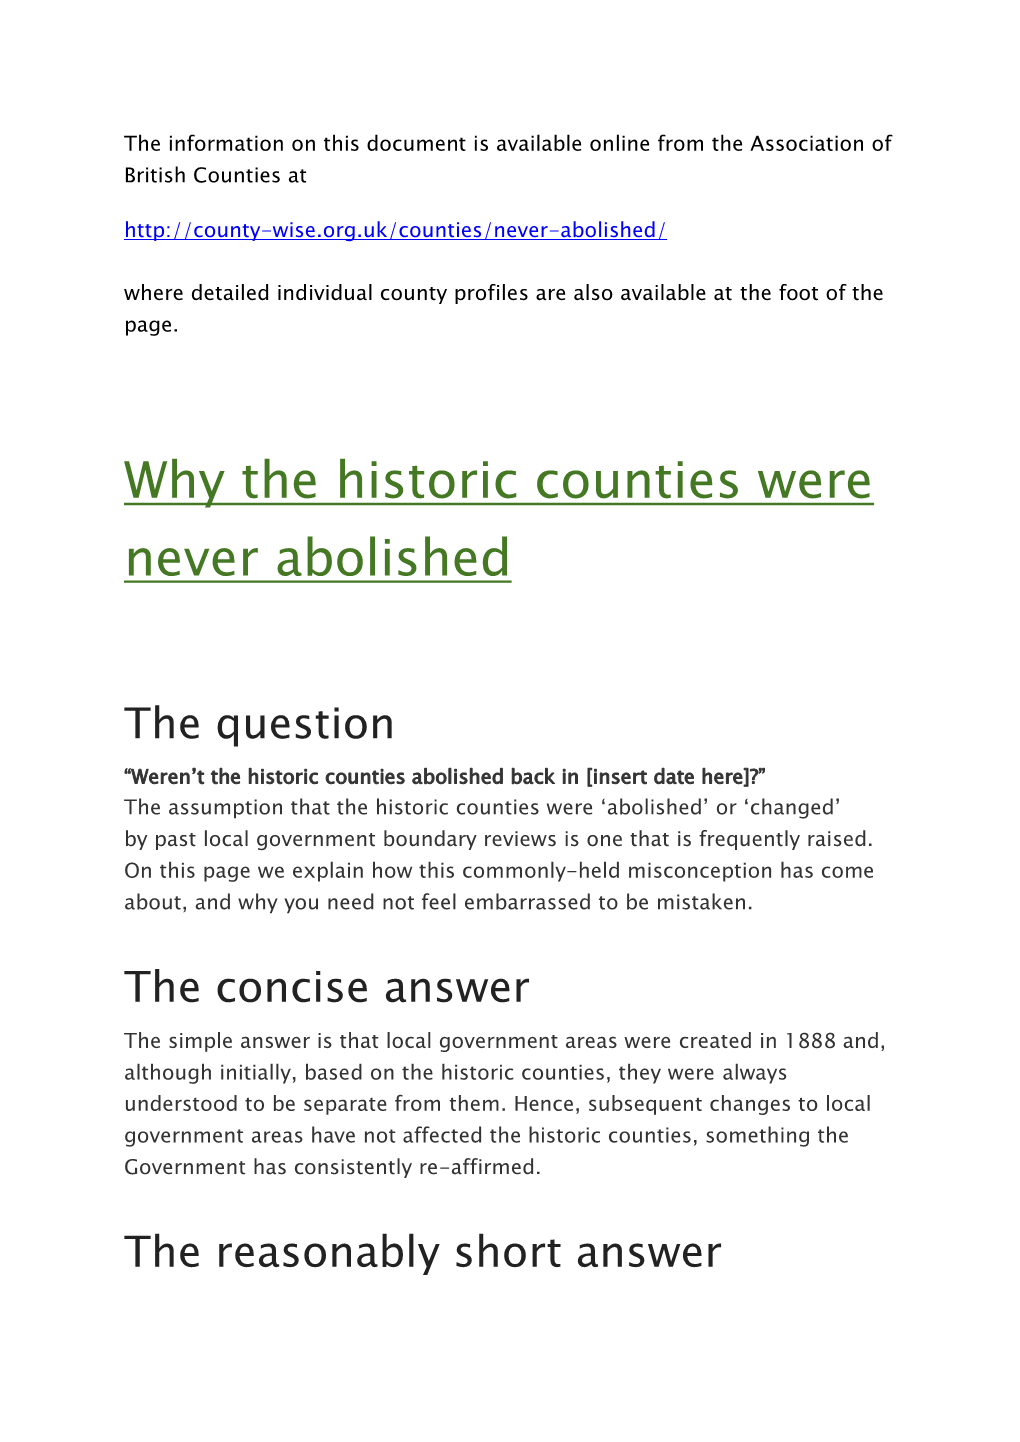 Why the Historic Counties Were Never Abolished